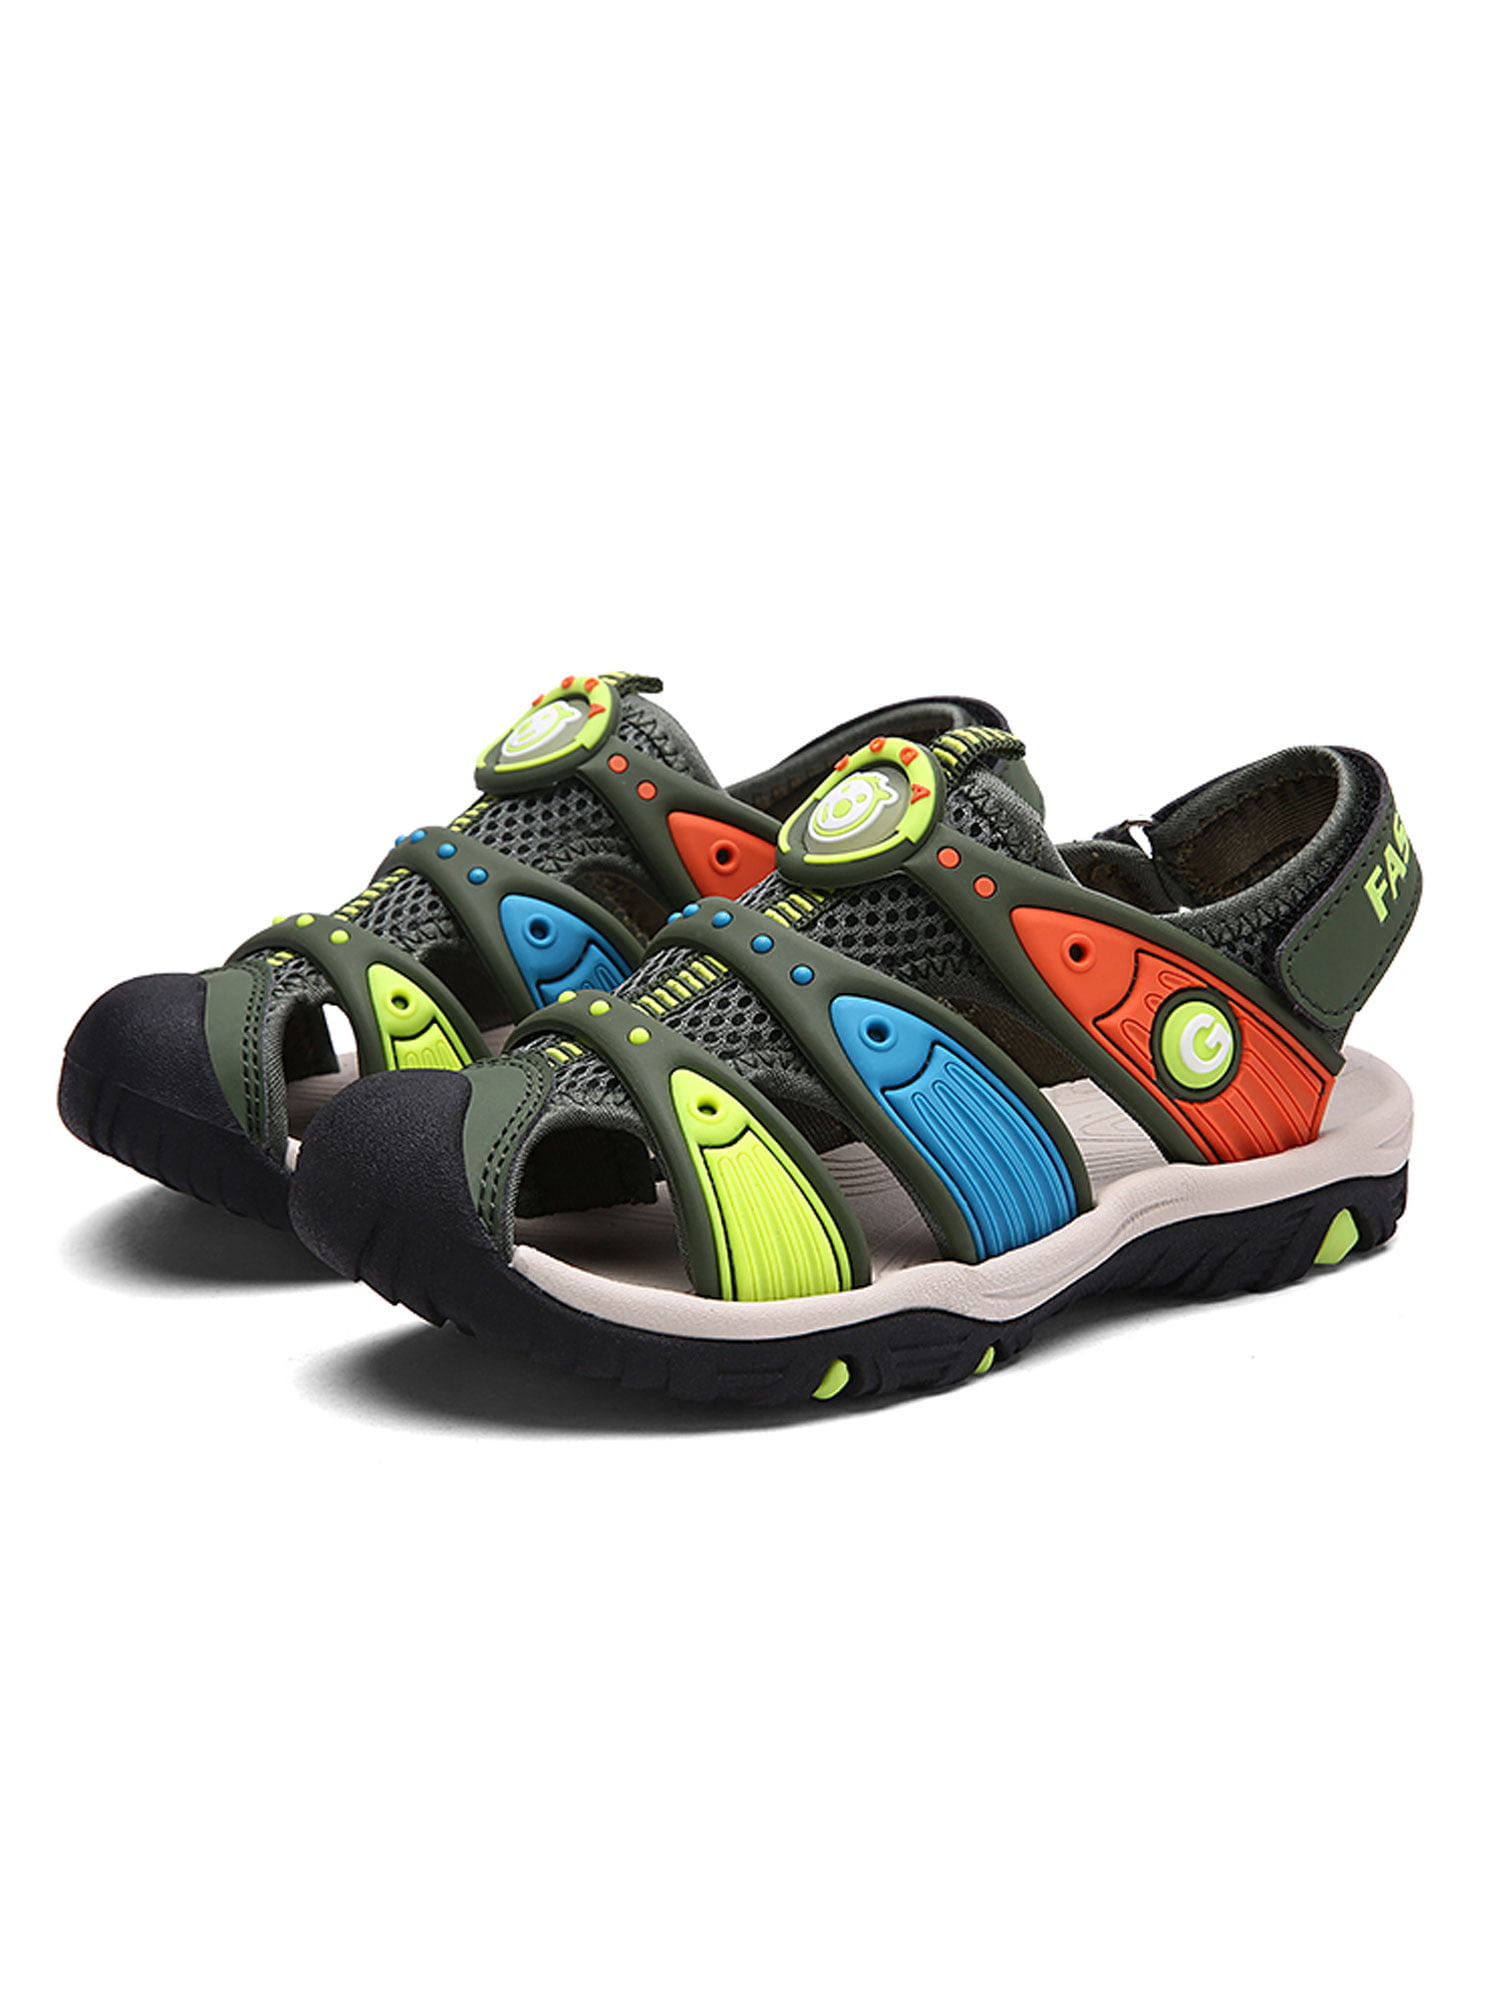 CYBLING Boys and Girls Outdoor Sport Sandals Kids Closed-Toe Breathable  Mesh Water Shoes